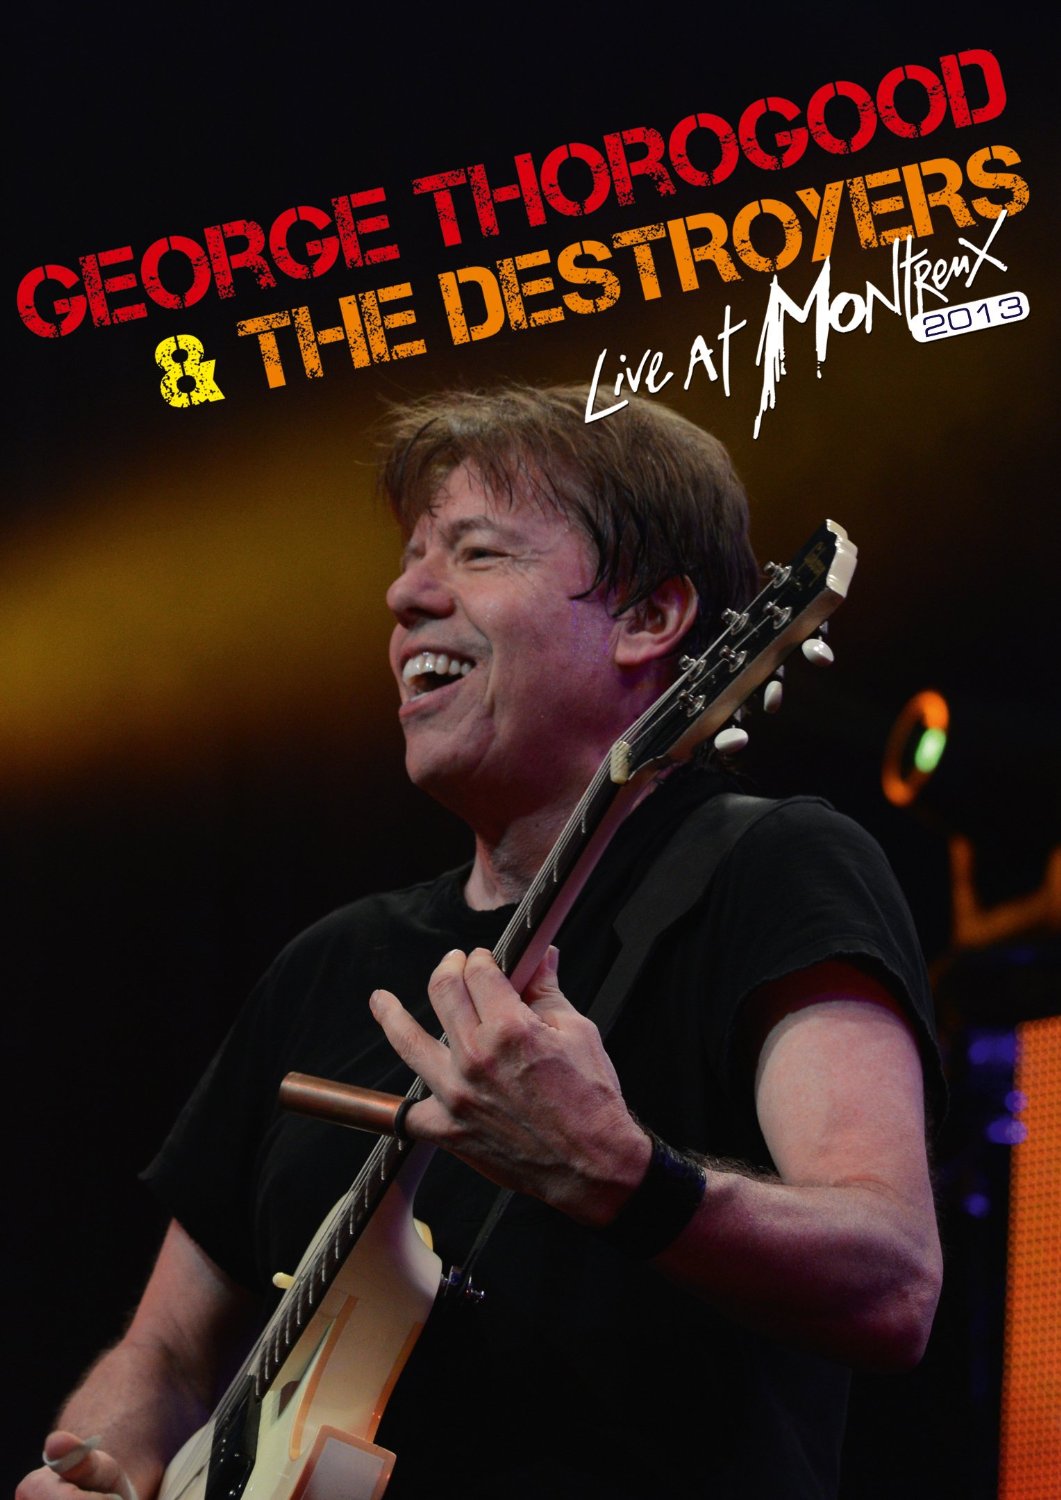 George Thorogood&Destroyers - Live At Montreux 2013 - DVD